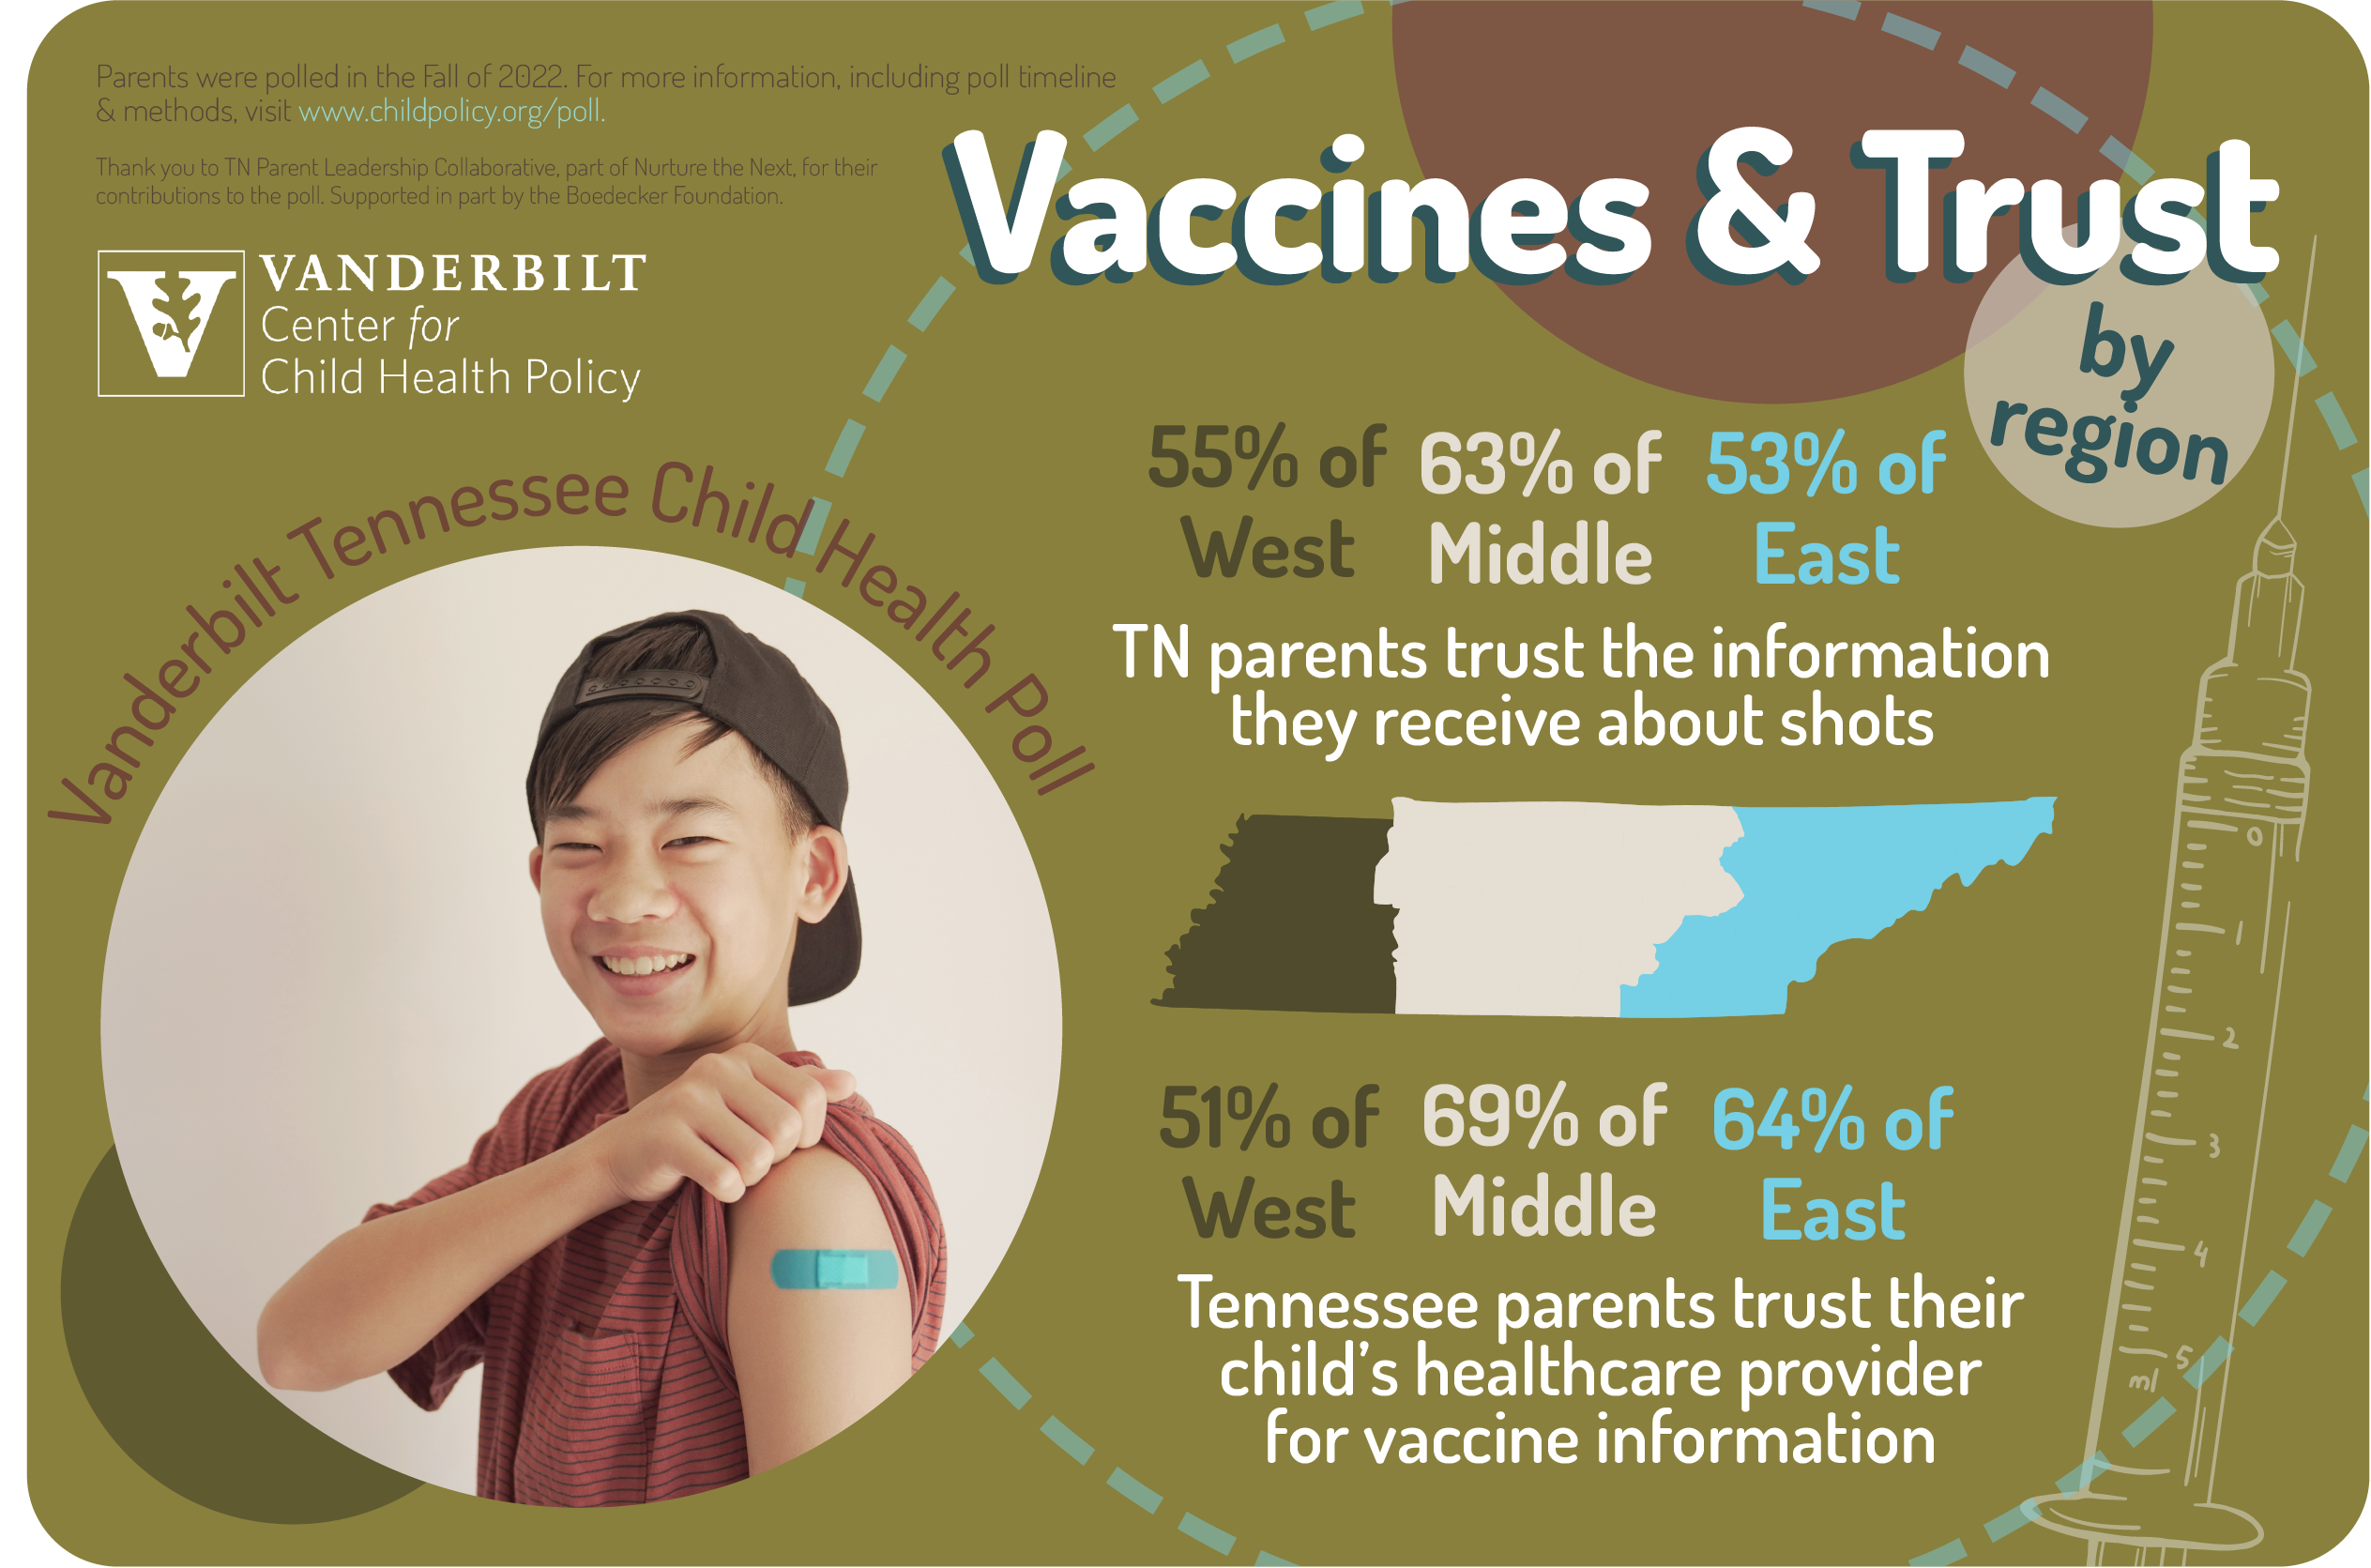 2022 Vaccines and Trust by Region